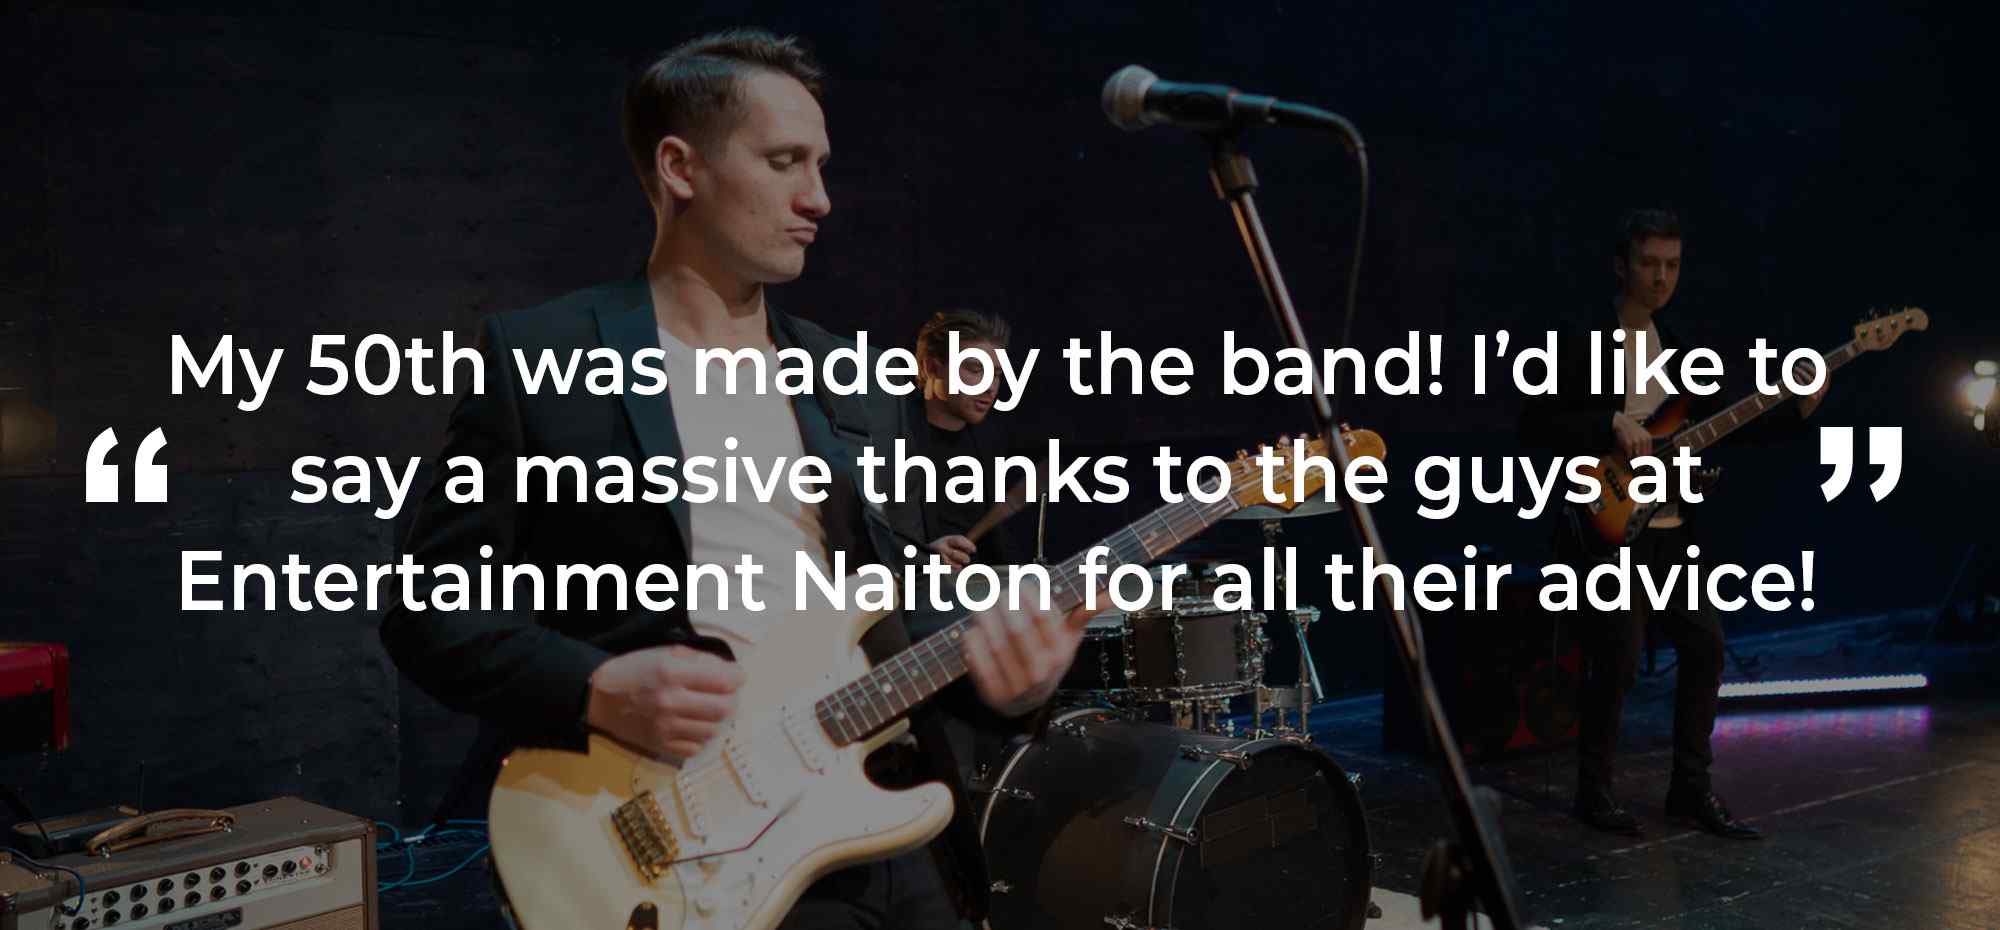 Client Review of a Party Band Shropshire